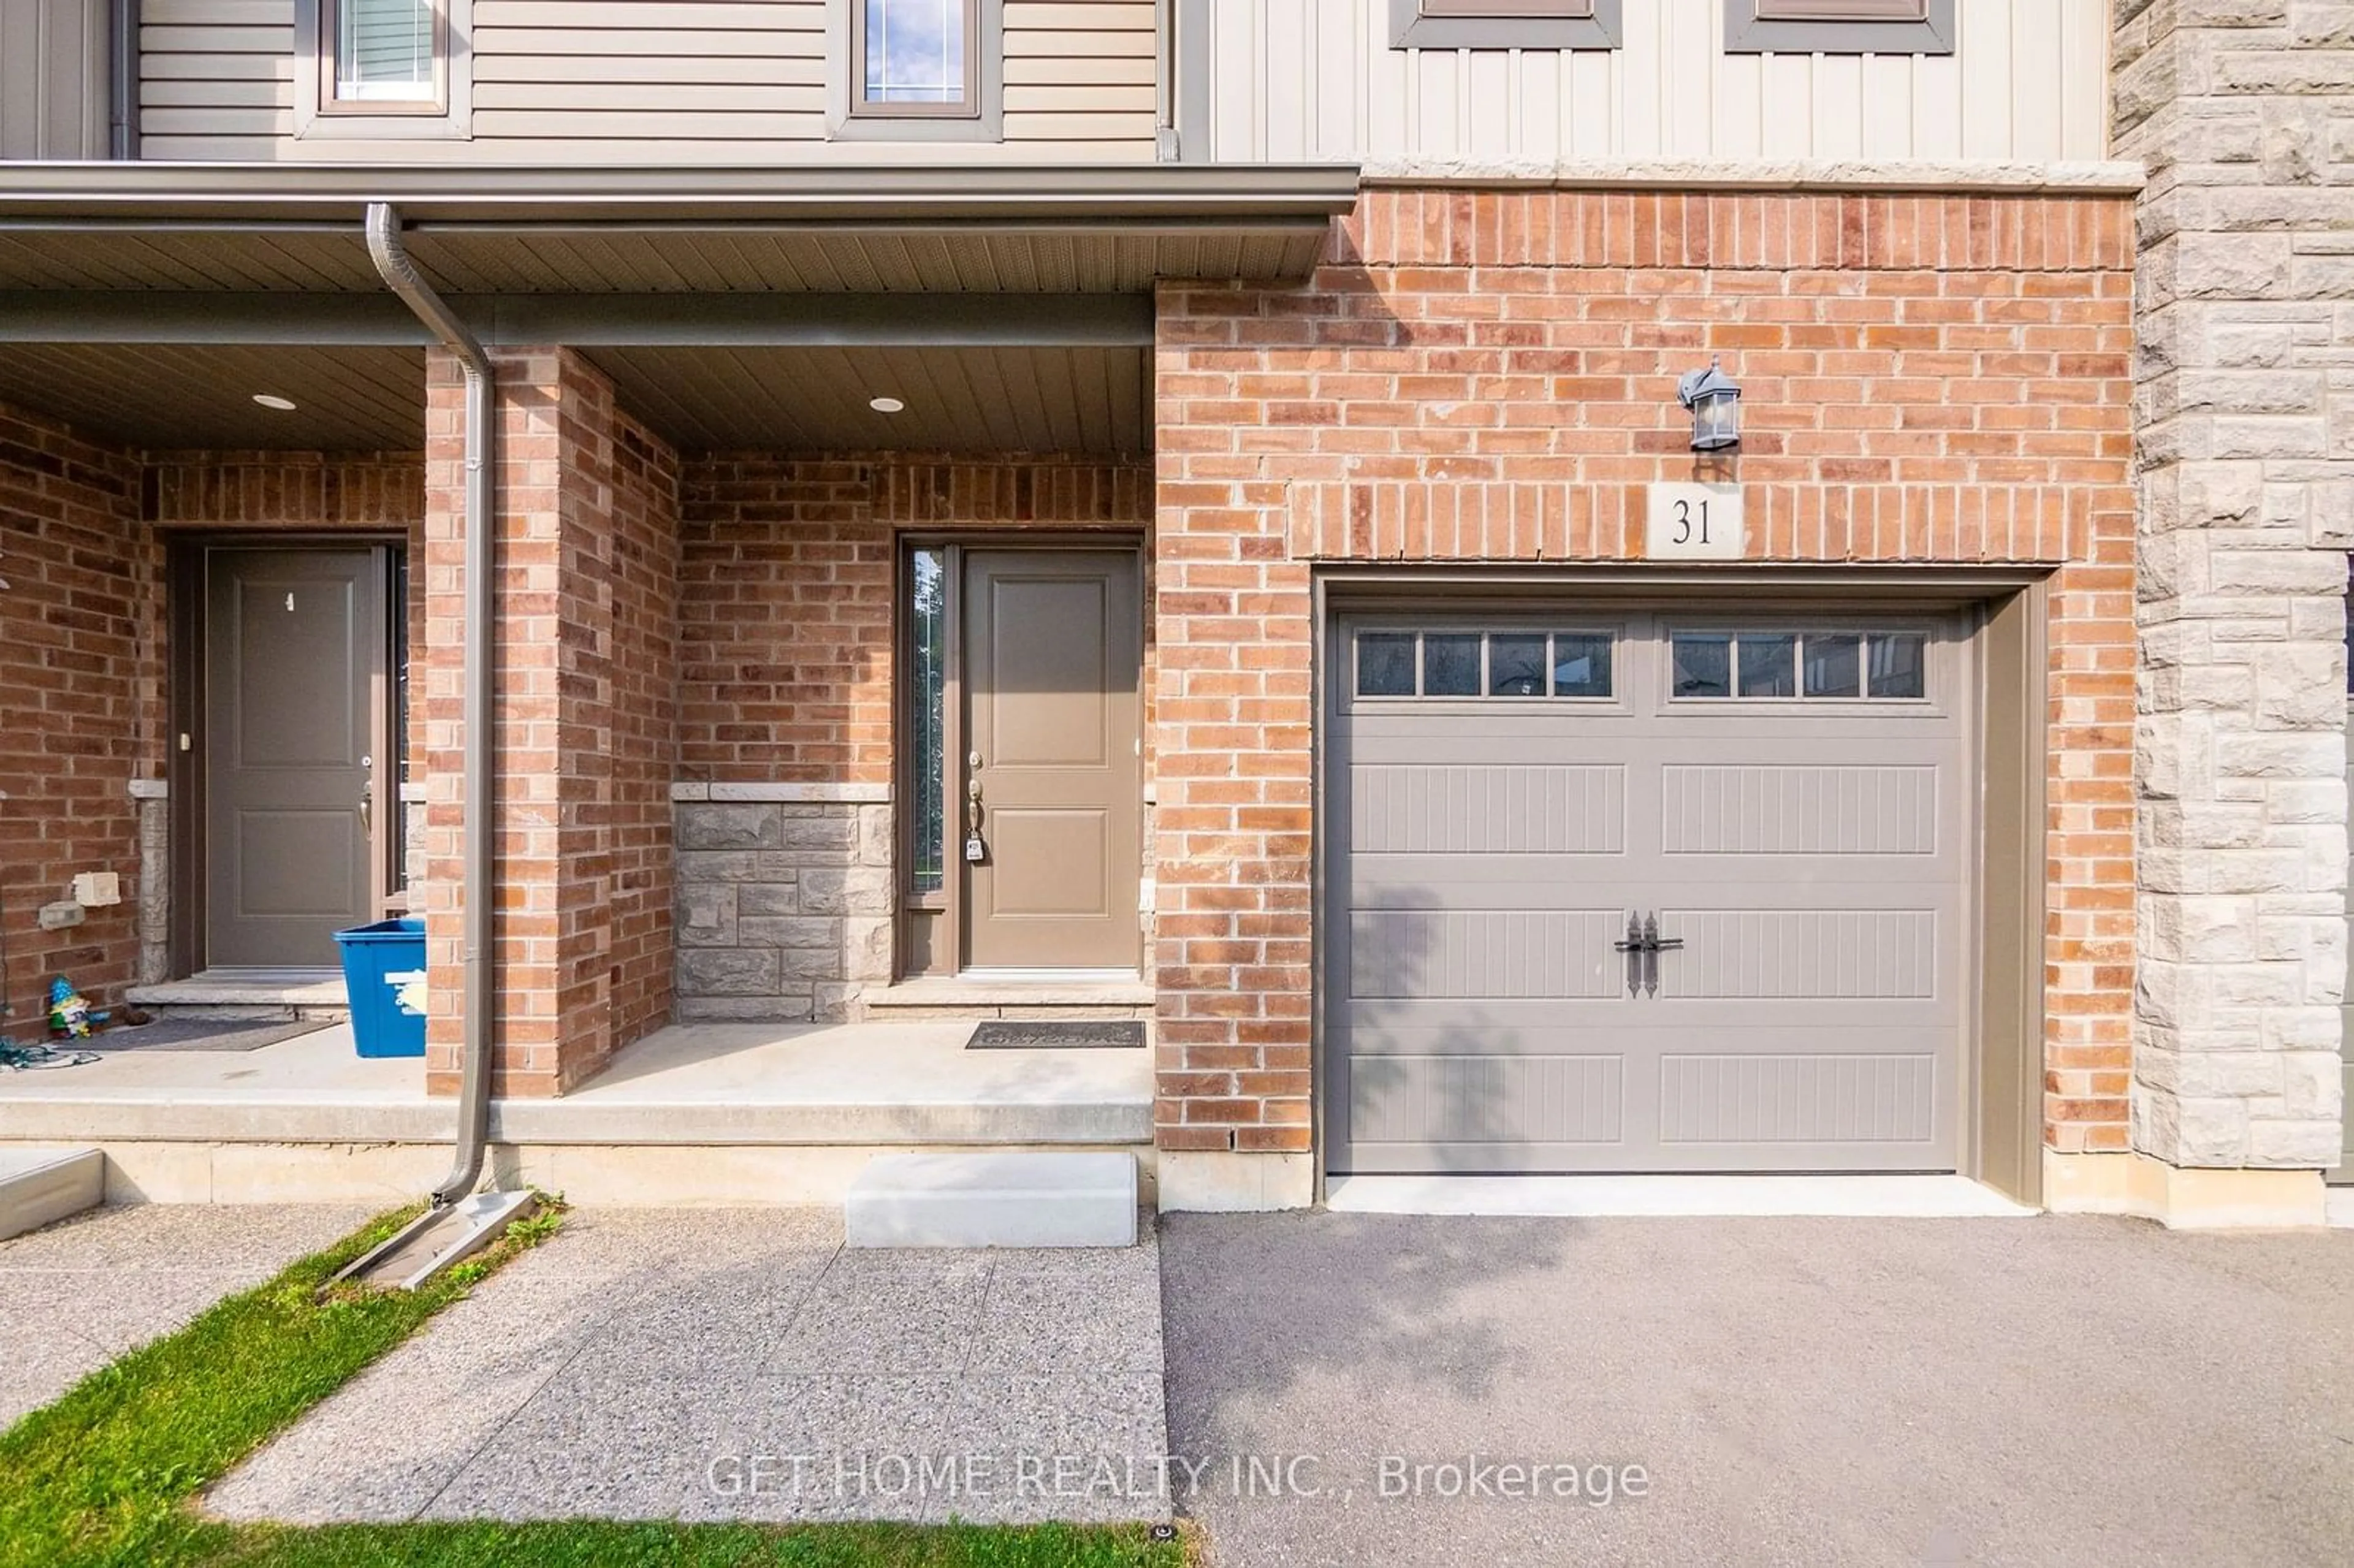 Home with brick exterior material for 77 Diana Ave #31, Brantford Ontario N3T 6P9